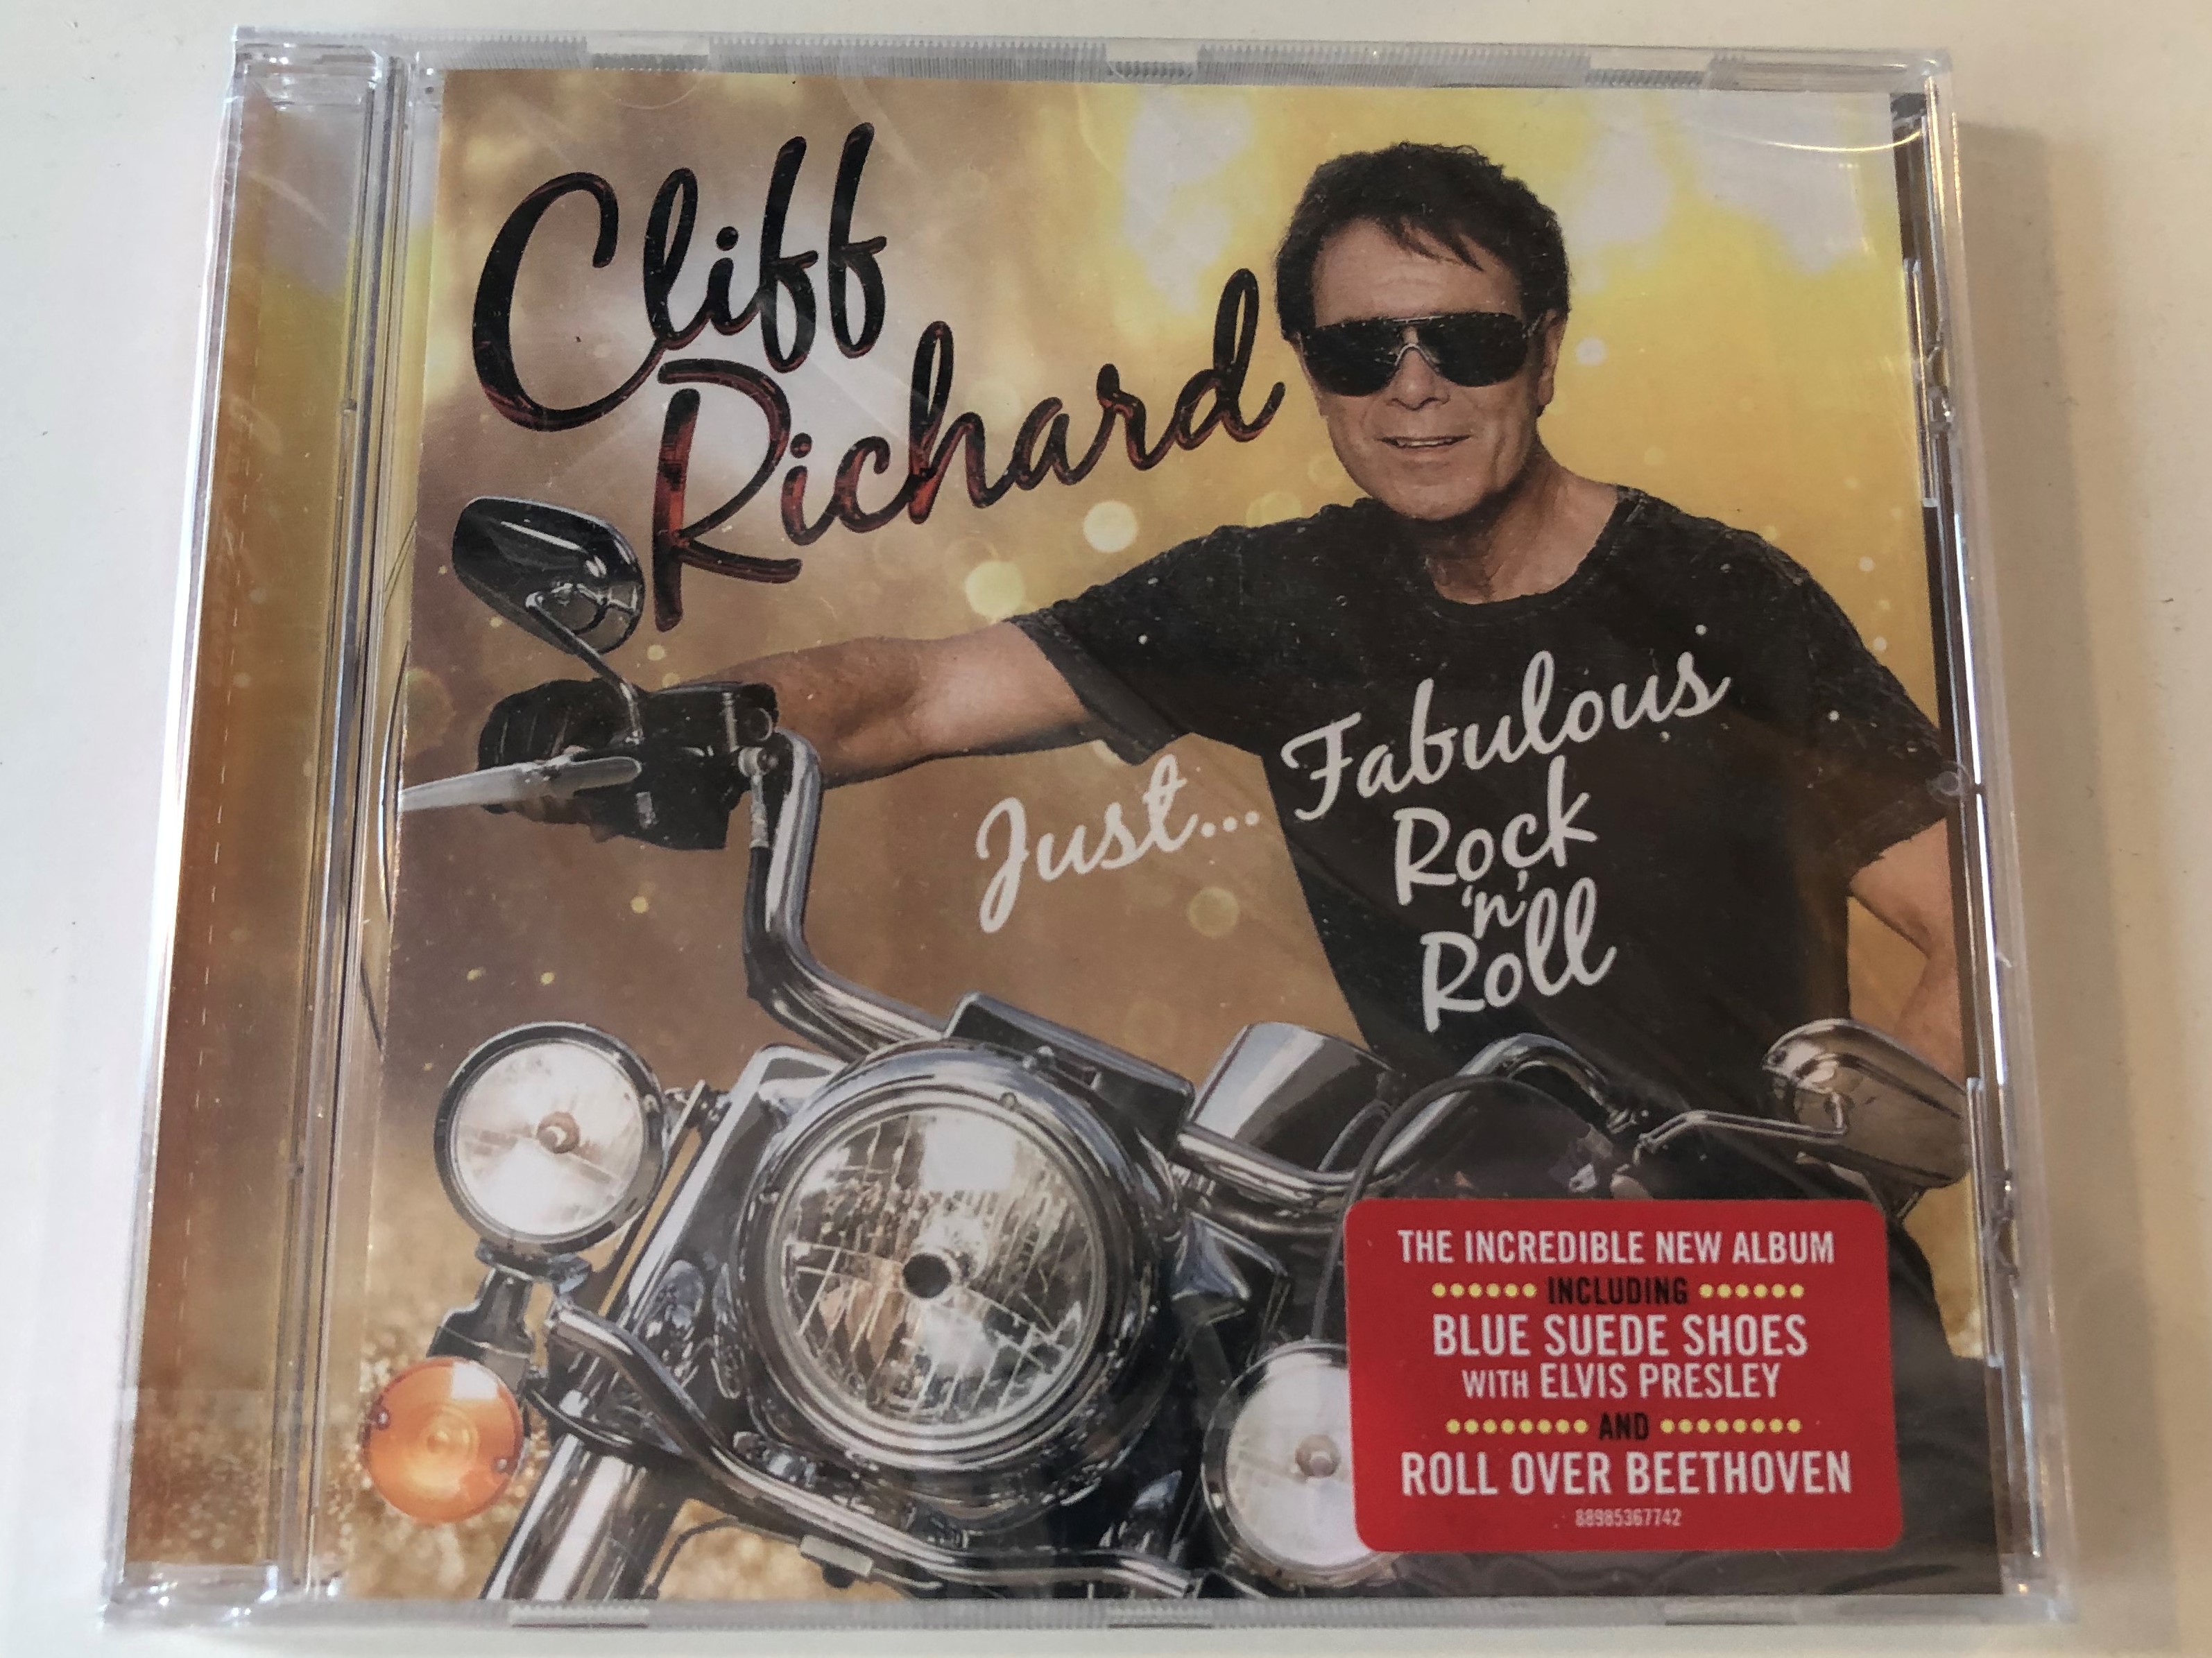 cliff-richard-just...-fabulous-rock-n-roll-the-incredible-new-album-including-blue-suede-shoes-with-elvis-presley-and-roll-over-beethoven-sony-music-audio-cd-2016-88985367742-1-.jpg